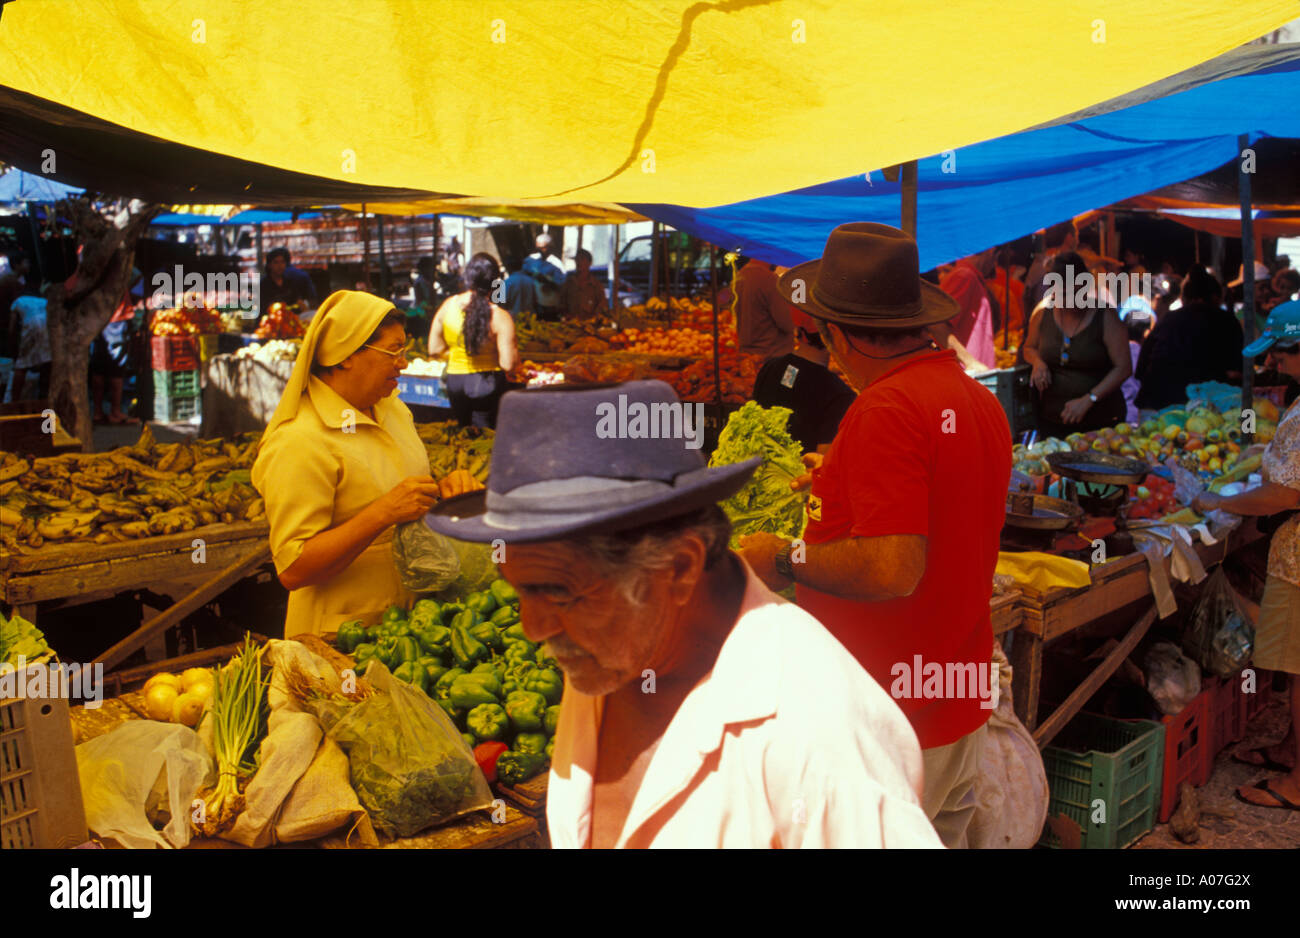 Street market, food for sale ( vegetables, fruits ) - popular commerce for low income customers commonly found at small cities of northeastern Brazil. Stock Photo